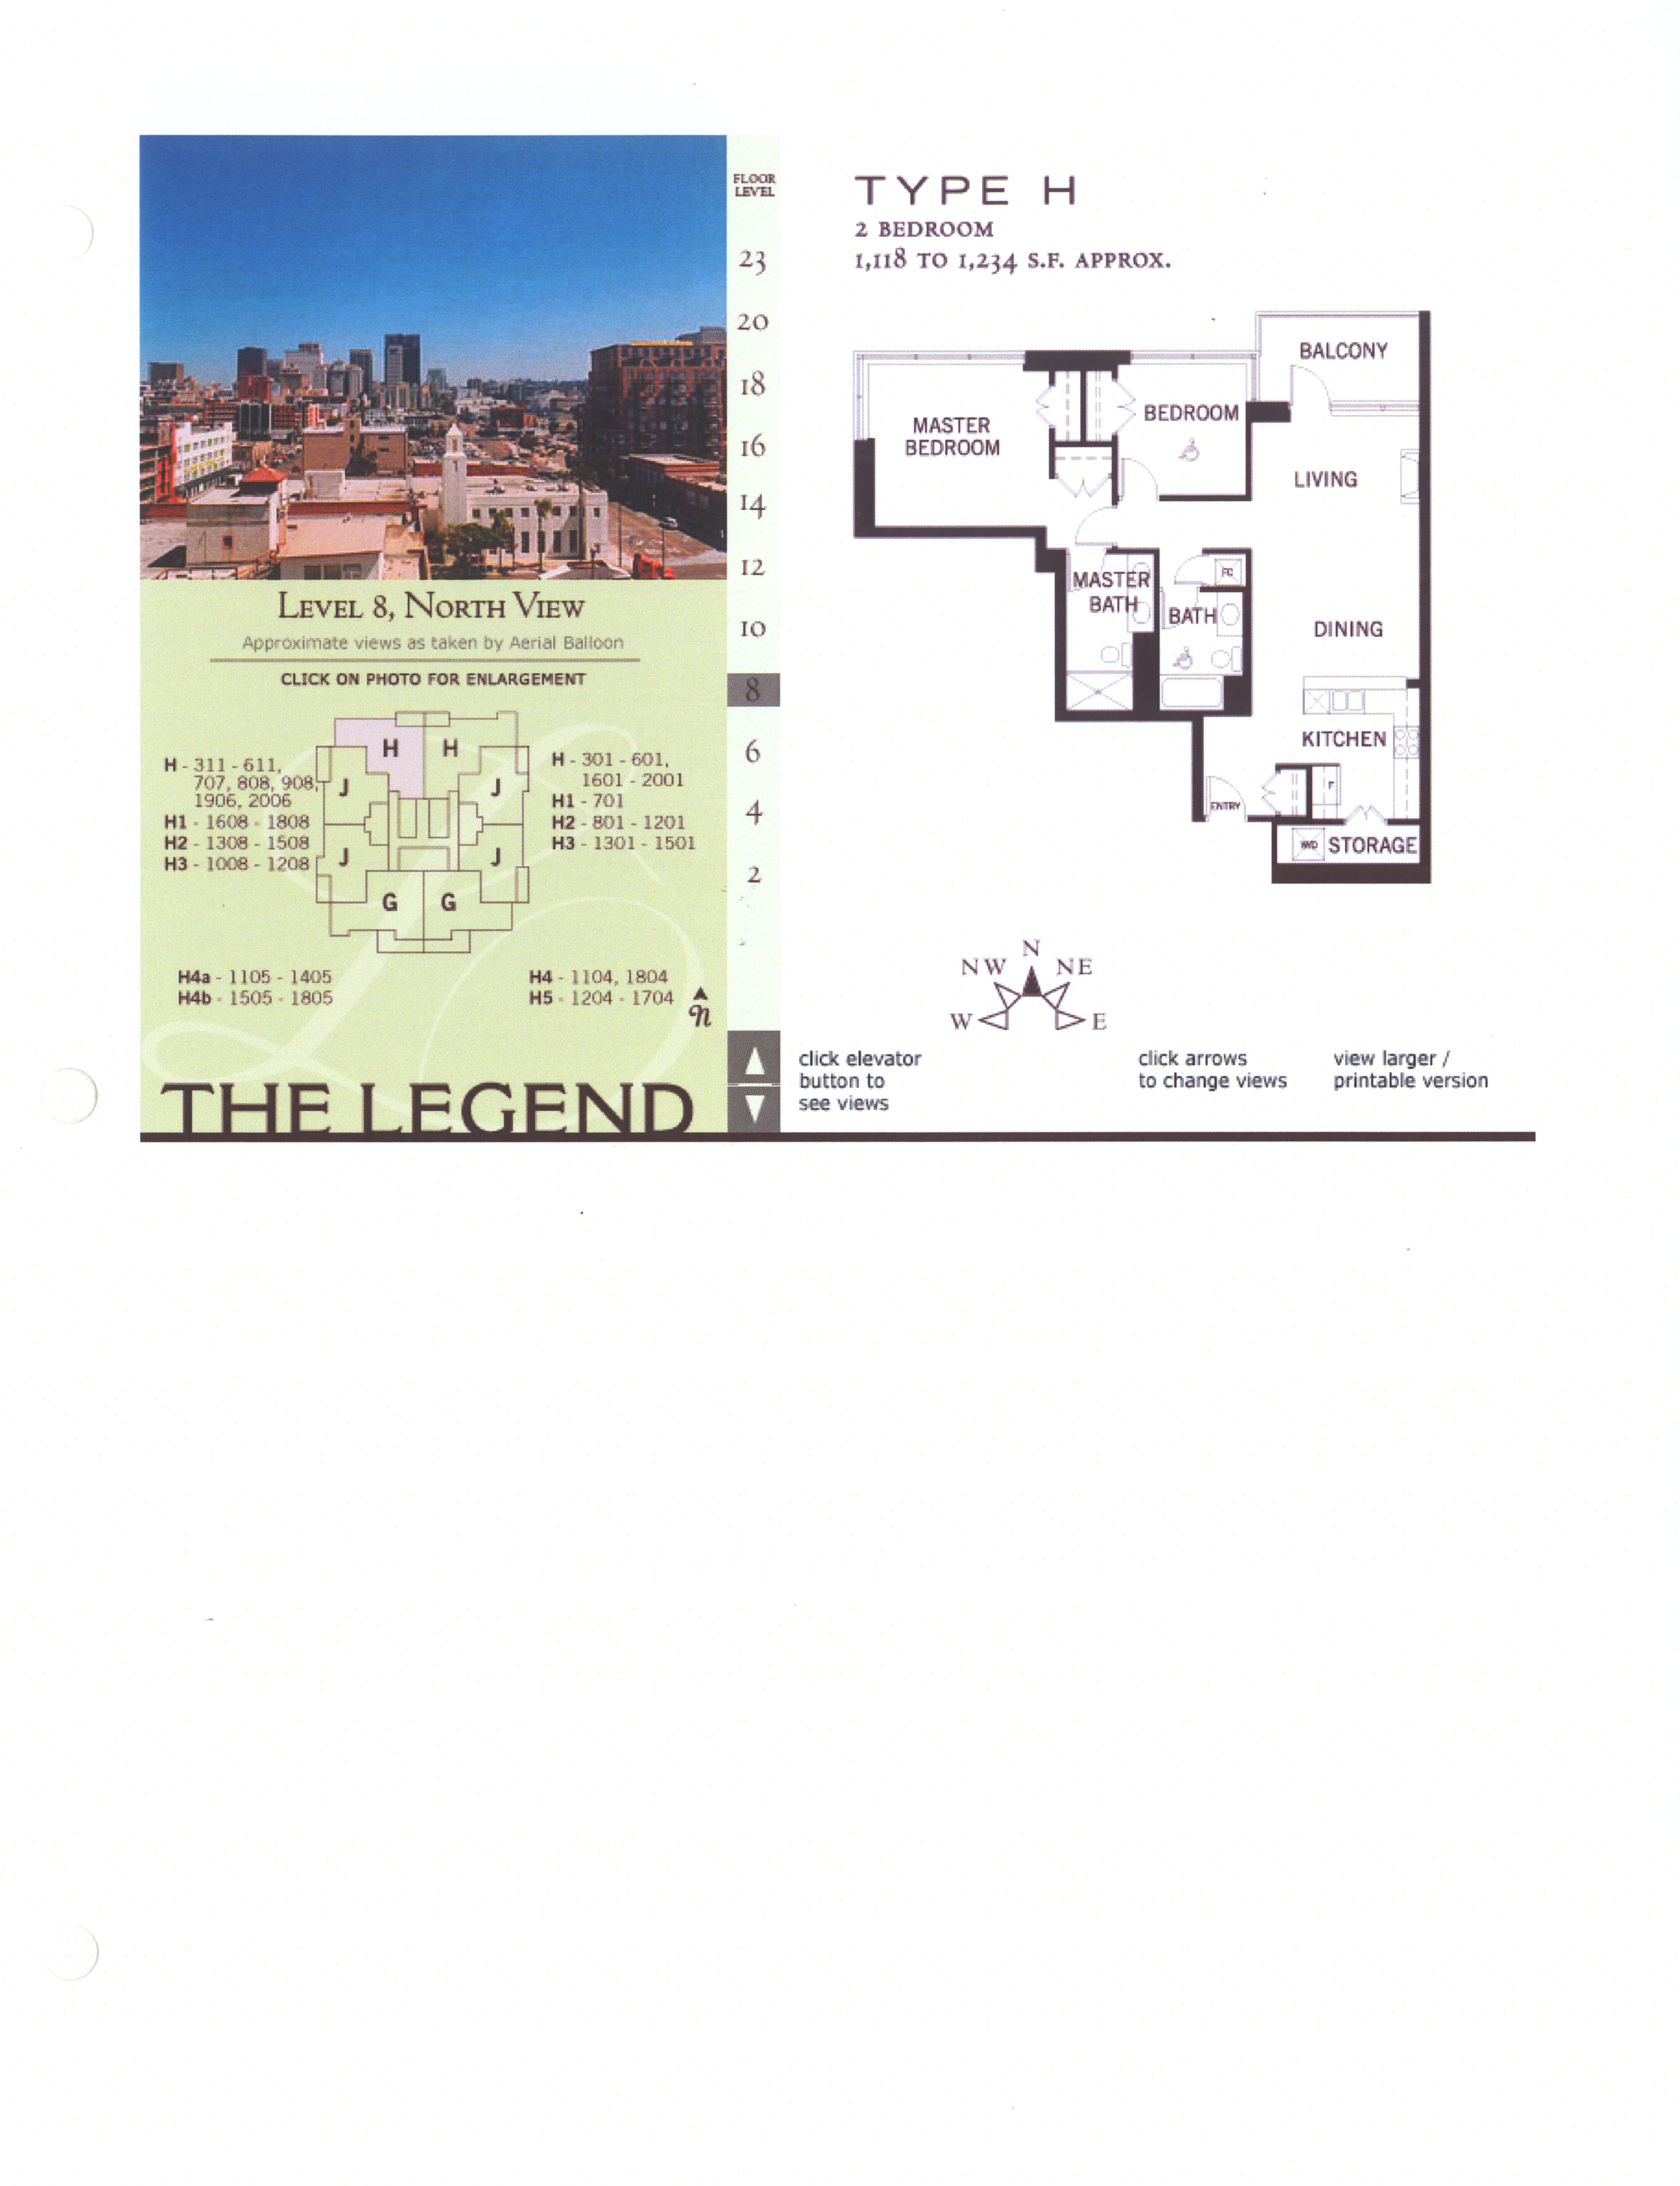 The Legend Floor Plan Level 8, North View – Type H